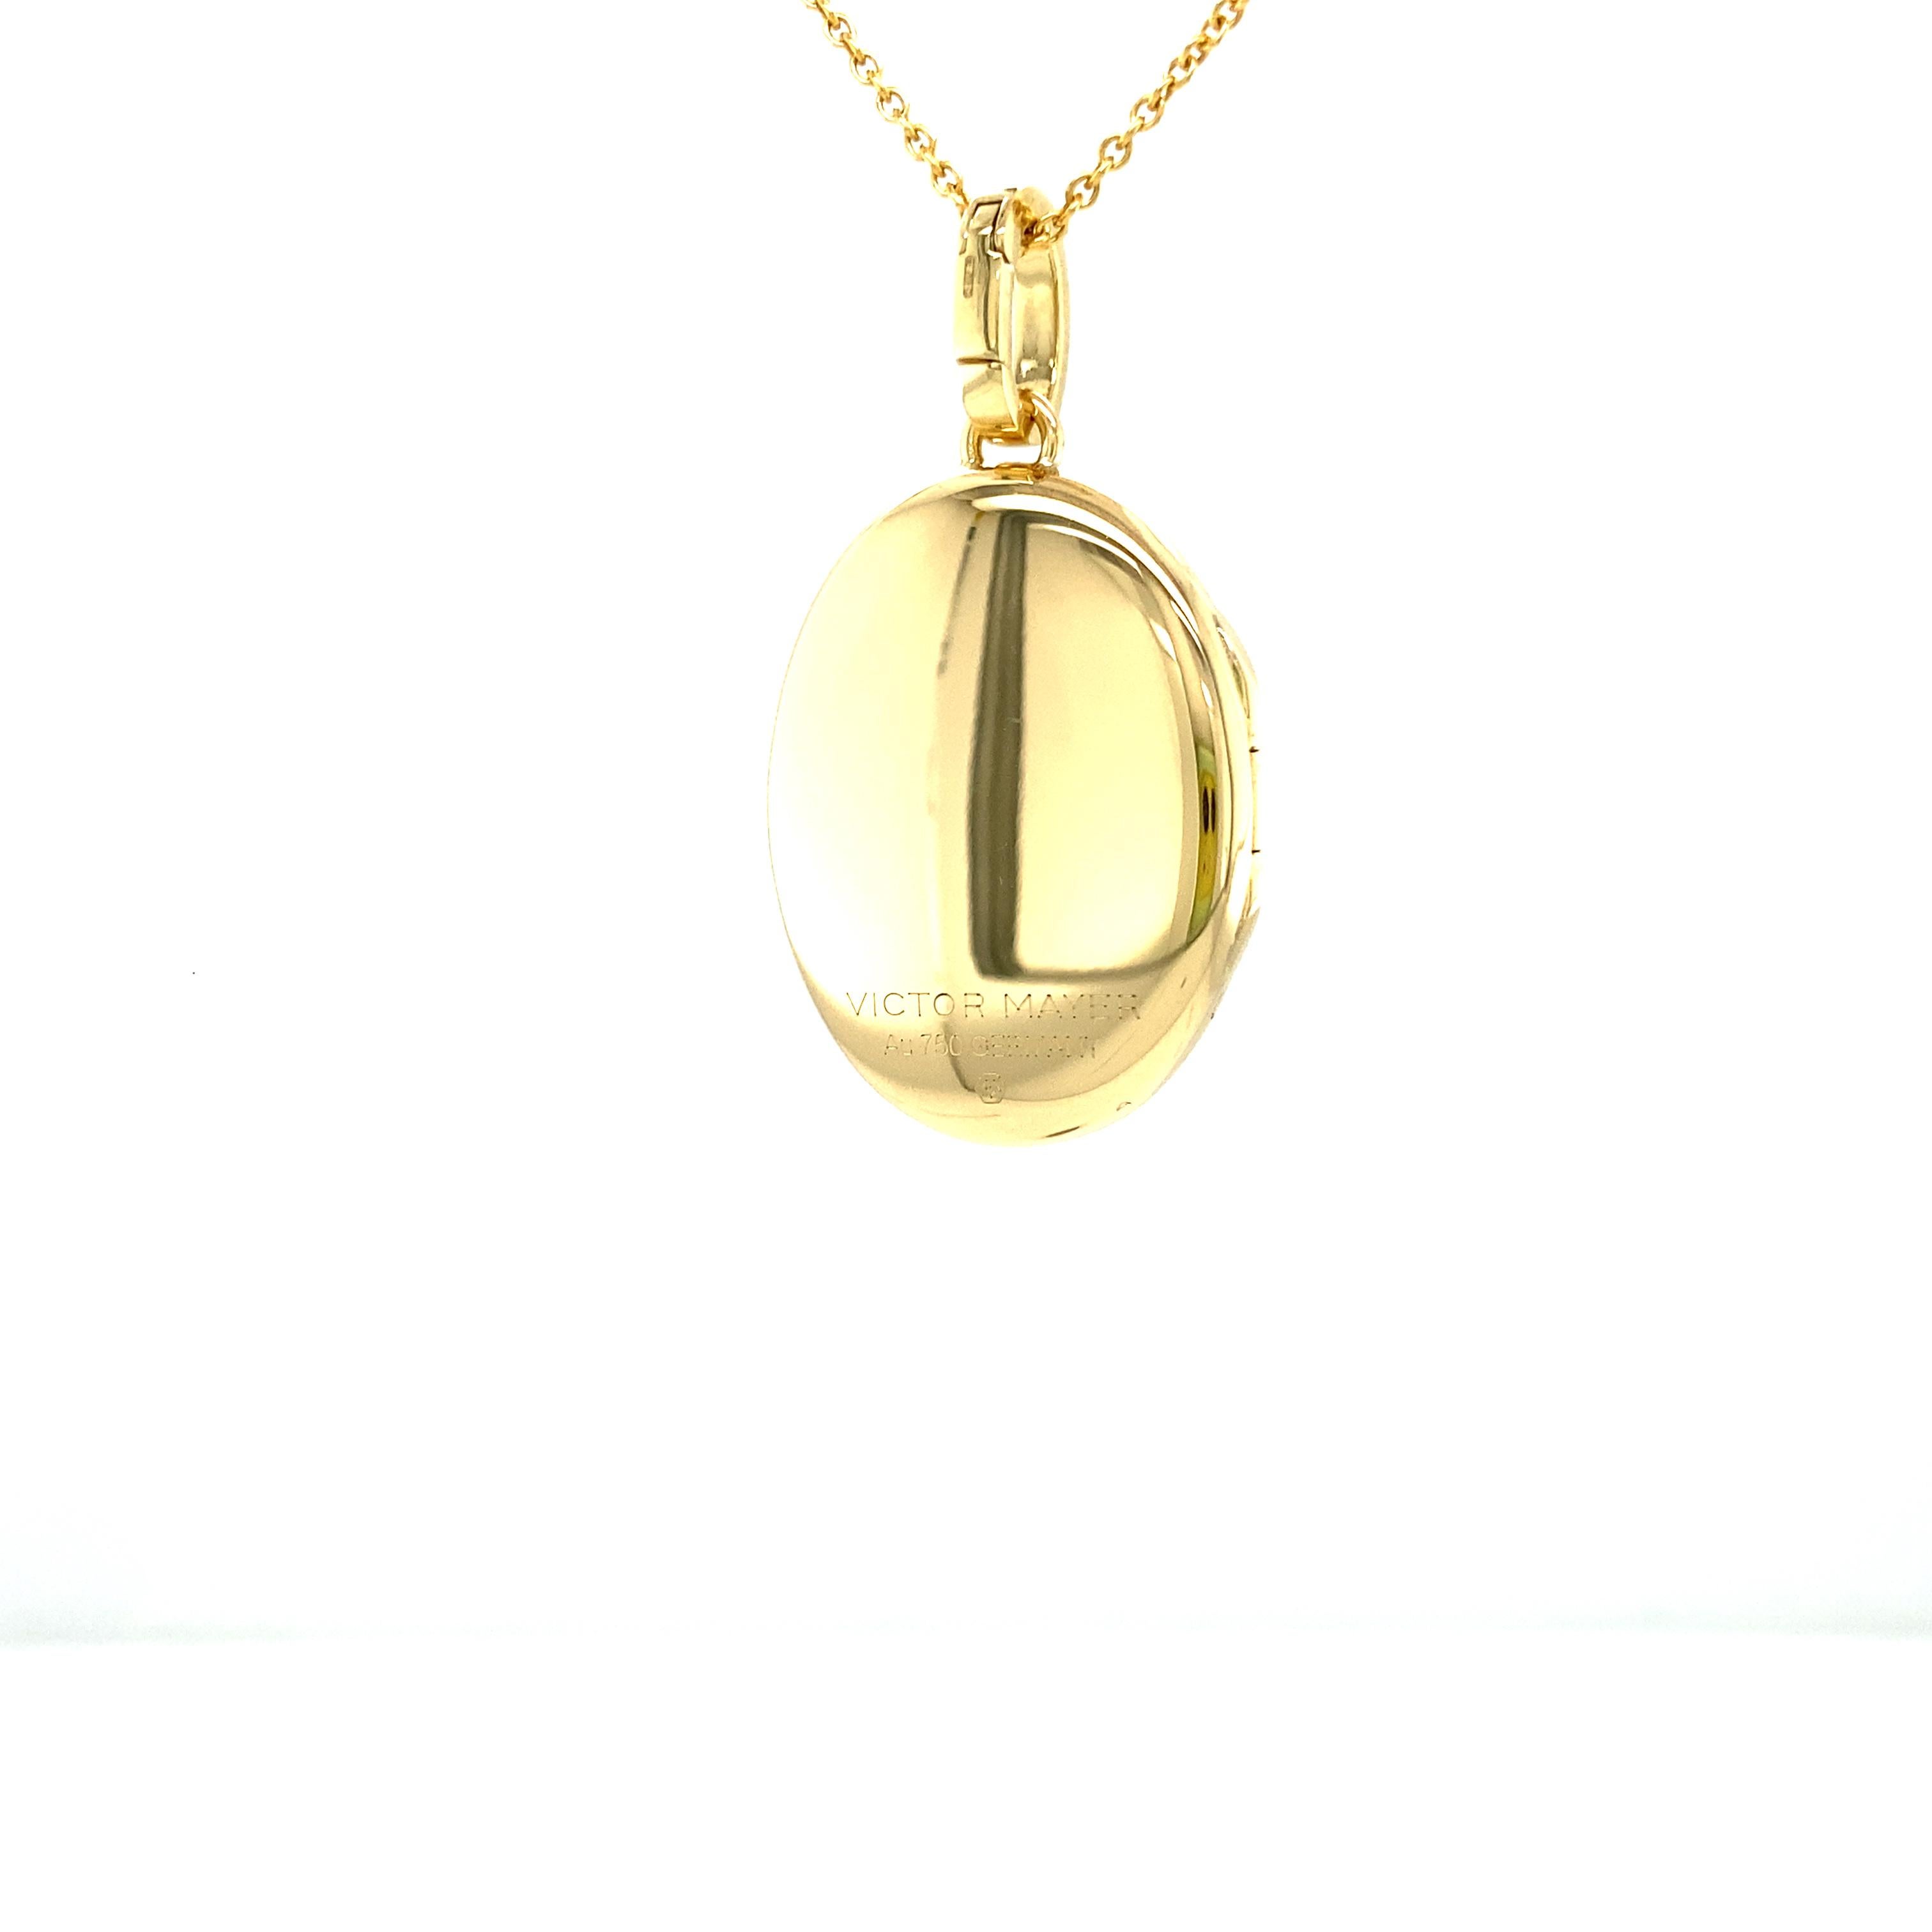 Oval Polished Locket Pendant Necklace - 18k Yellow Gold - 17 mm x 27 mm In New Condition For Sale In Pforzheim, DE